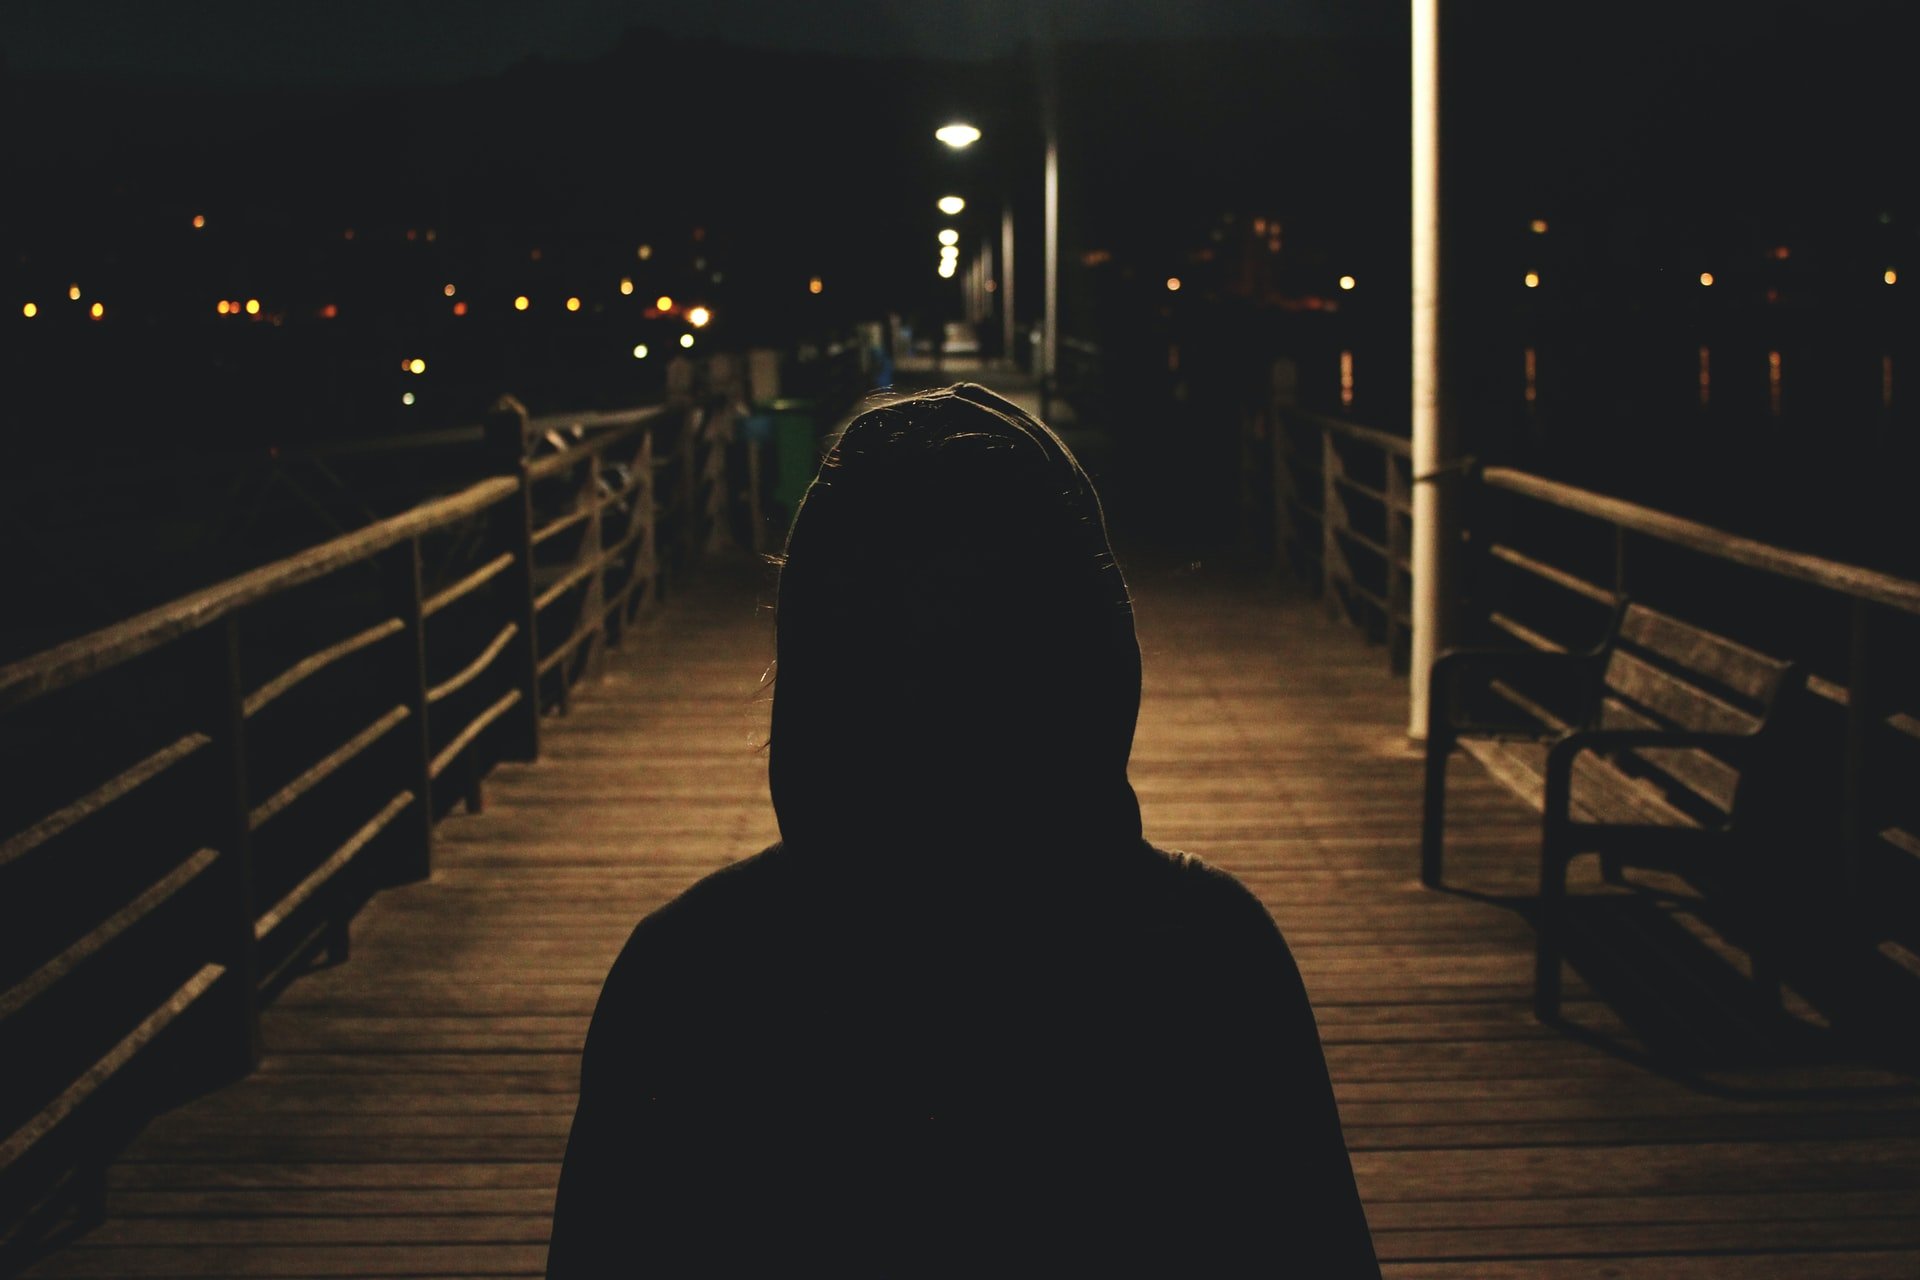 She was terrified and looked for someone who could help her | Source: Unsplash